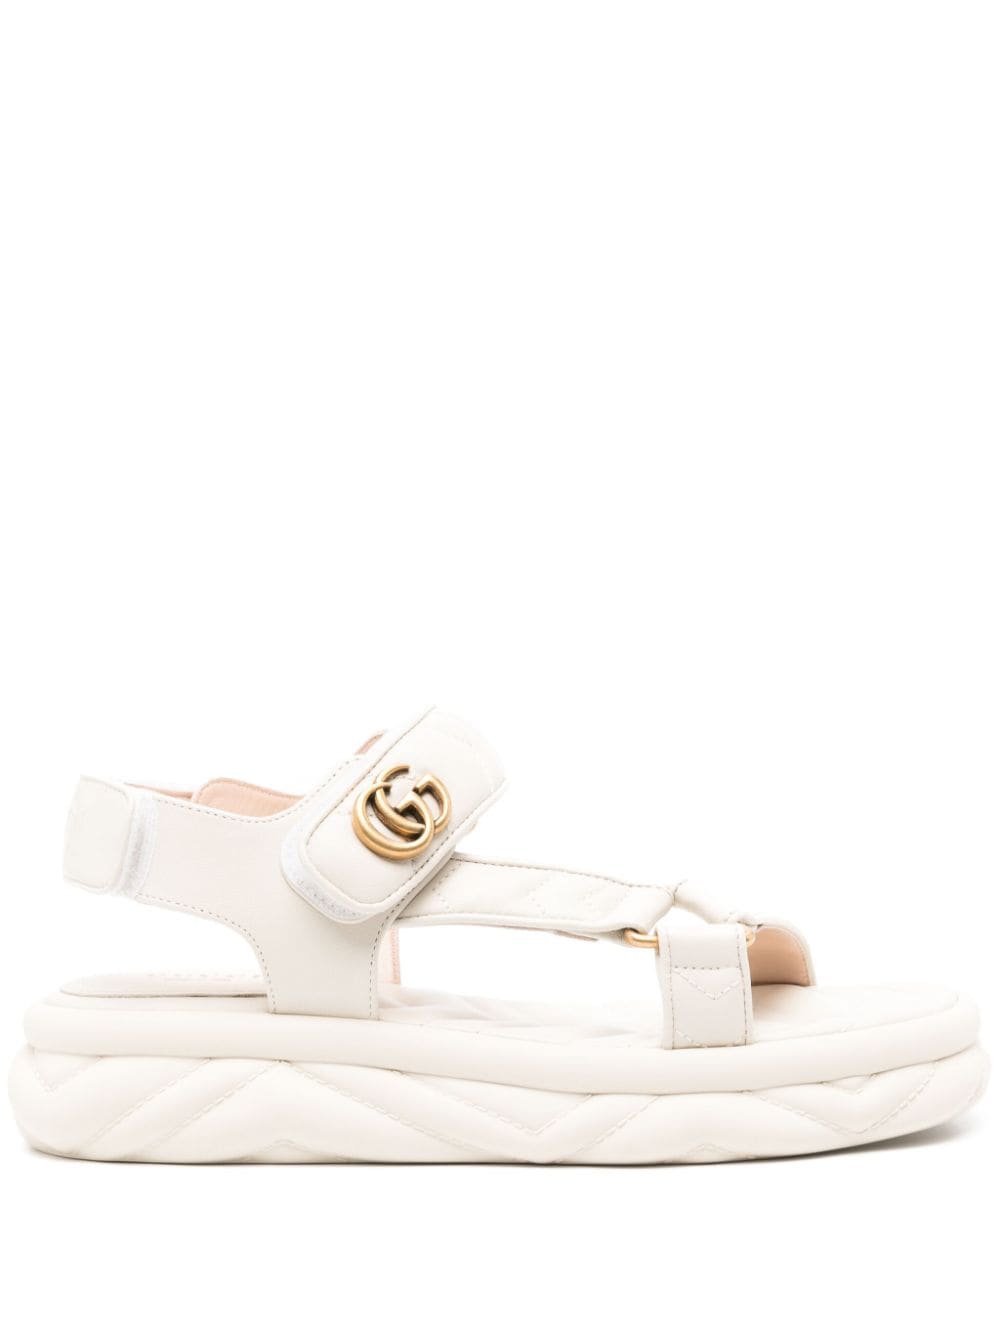 GUCCI DOUBLE-G LEATHER SANDALS